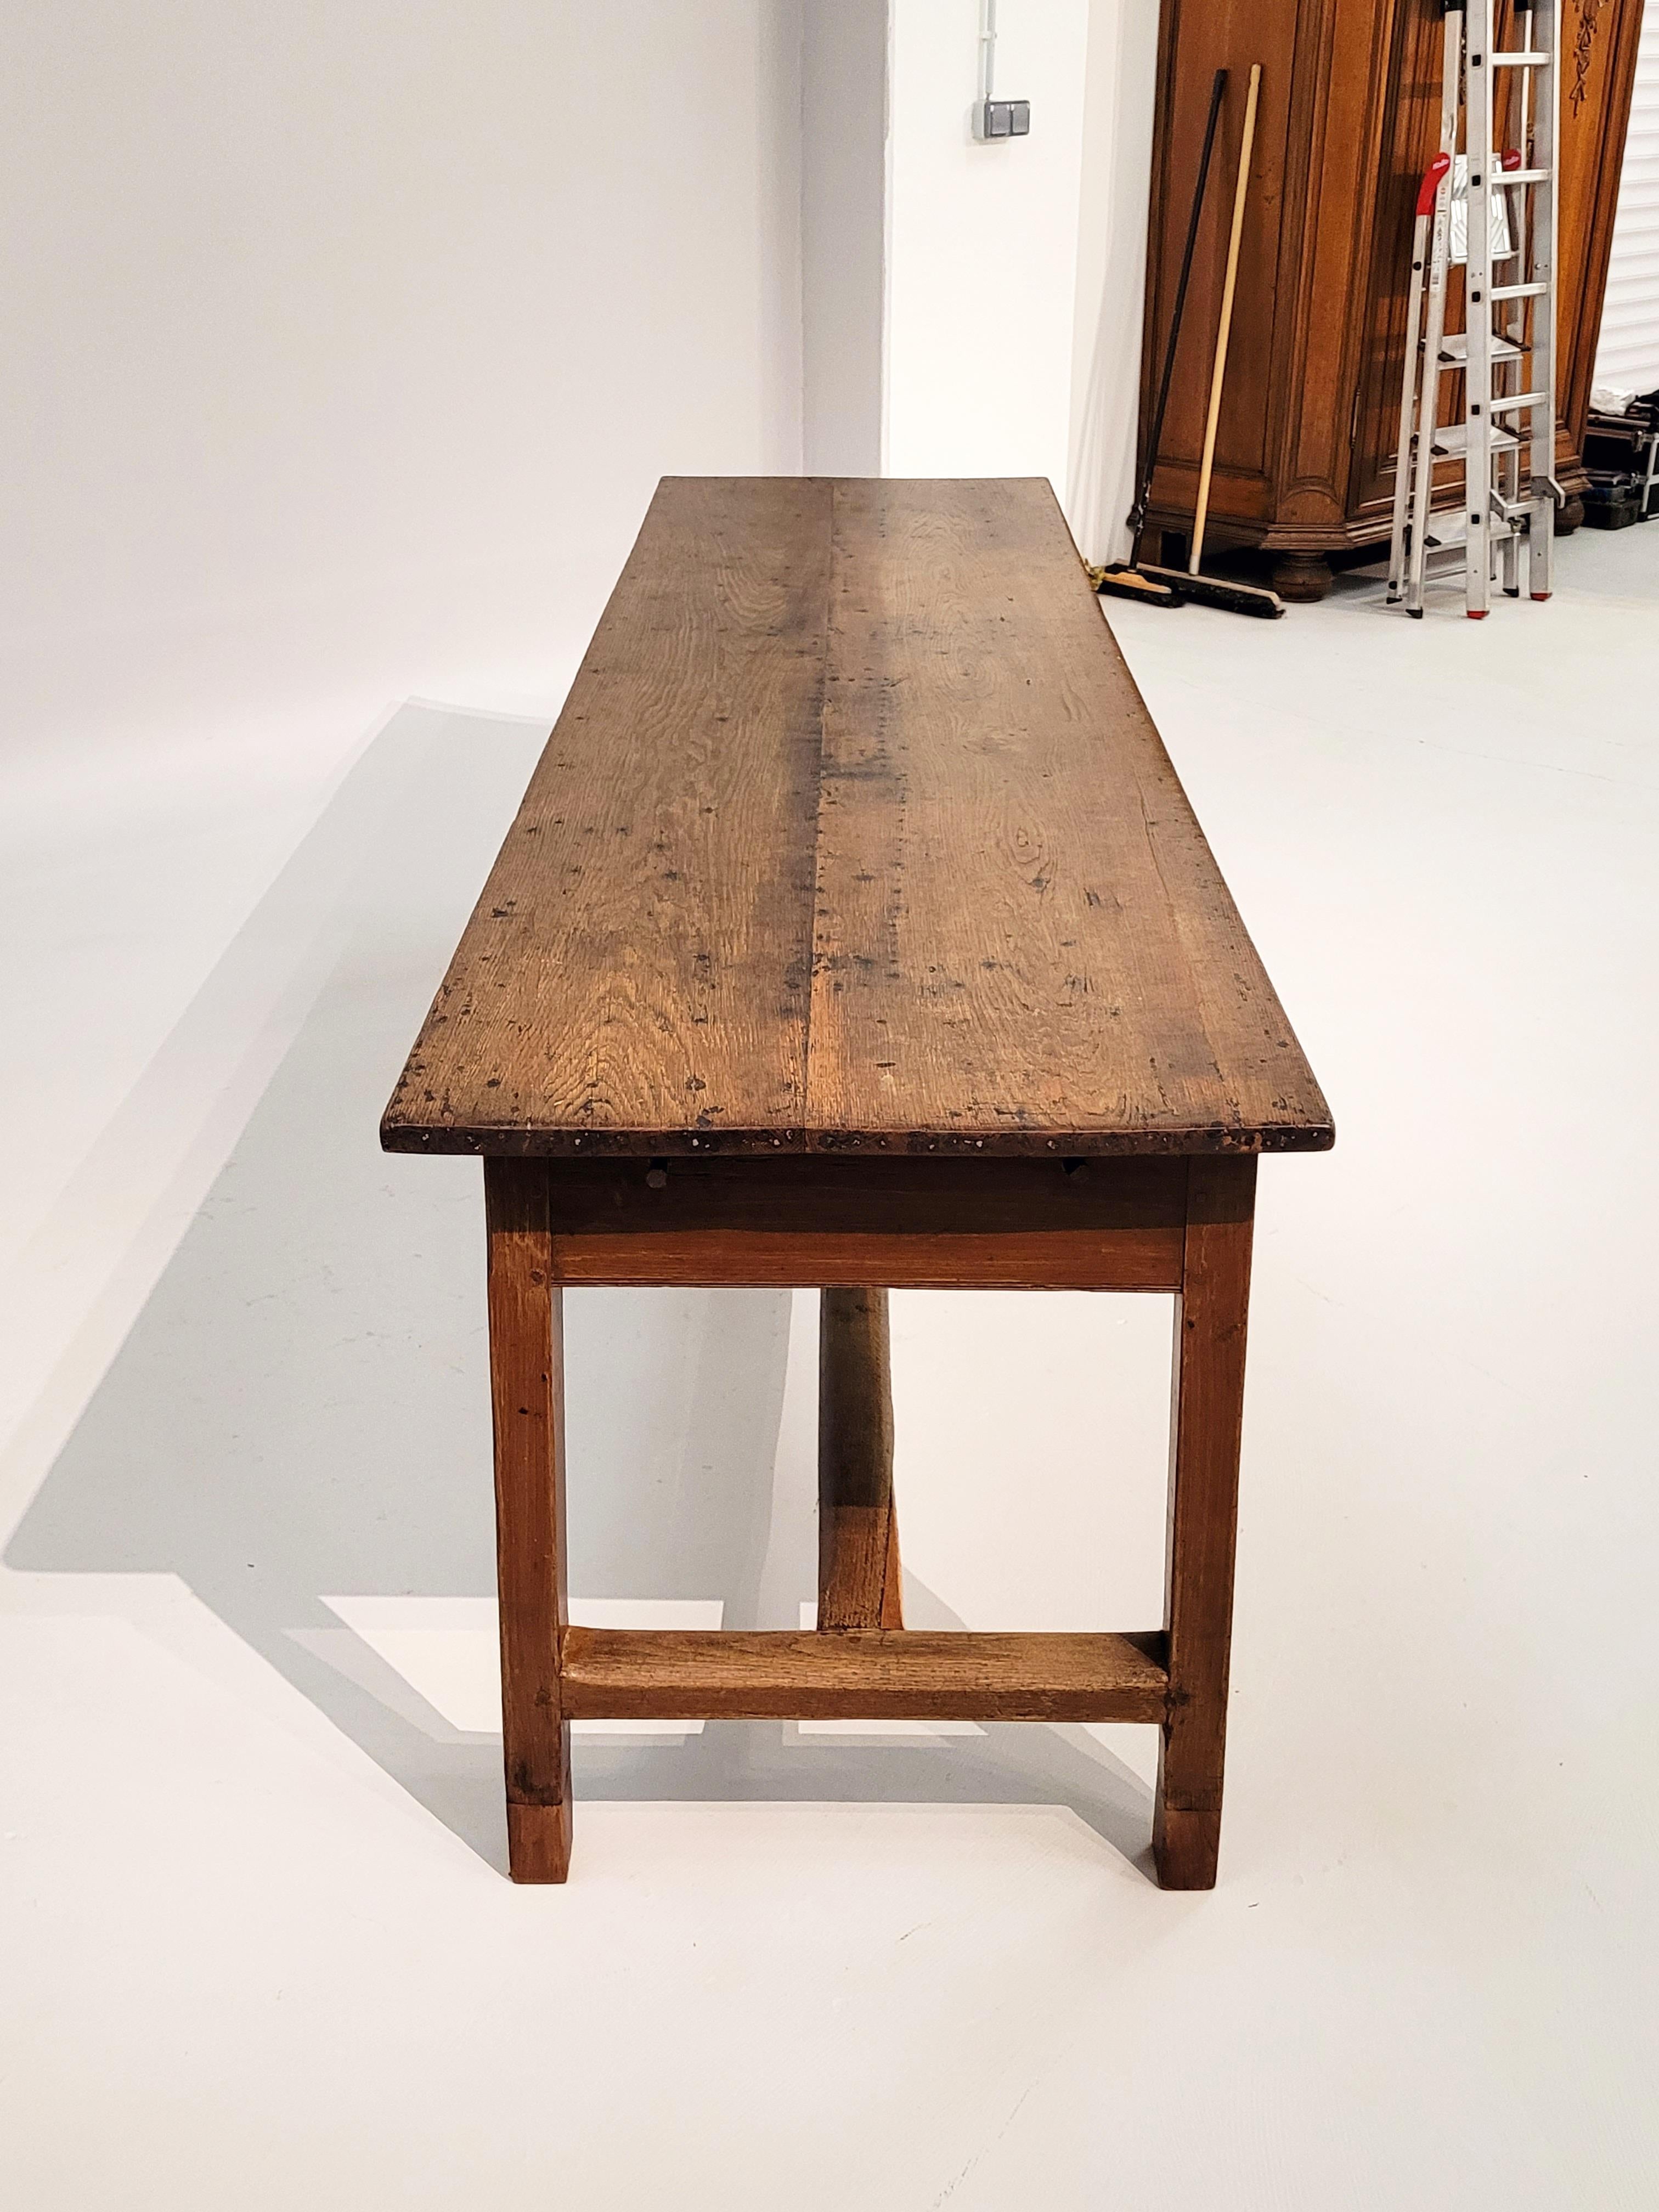 Antique brewery table

North Germany
Oak
19th century

Dimensions: H x W x D: 77 x 263 x 68 cm

Description:
Long and narrow brewing table made of solid oak with wonderful signs of age and patina. Optimal for 8-10 persons.

The base is